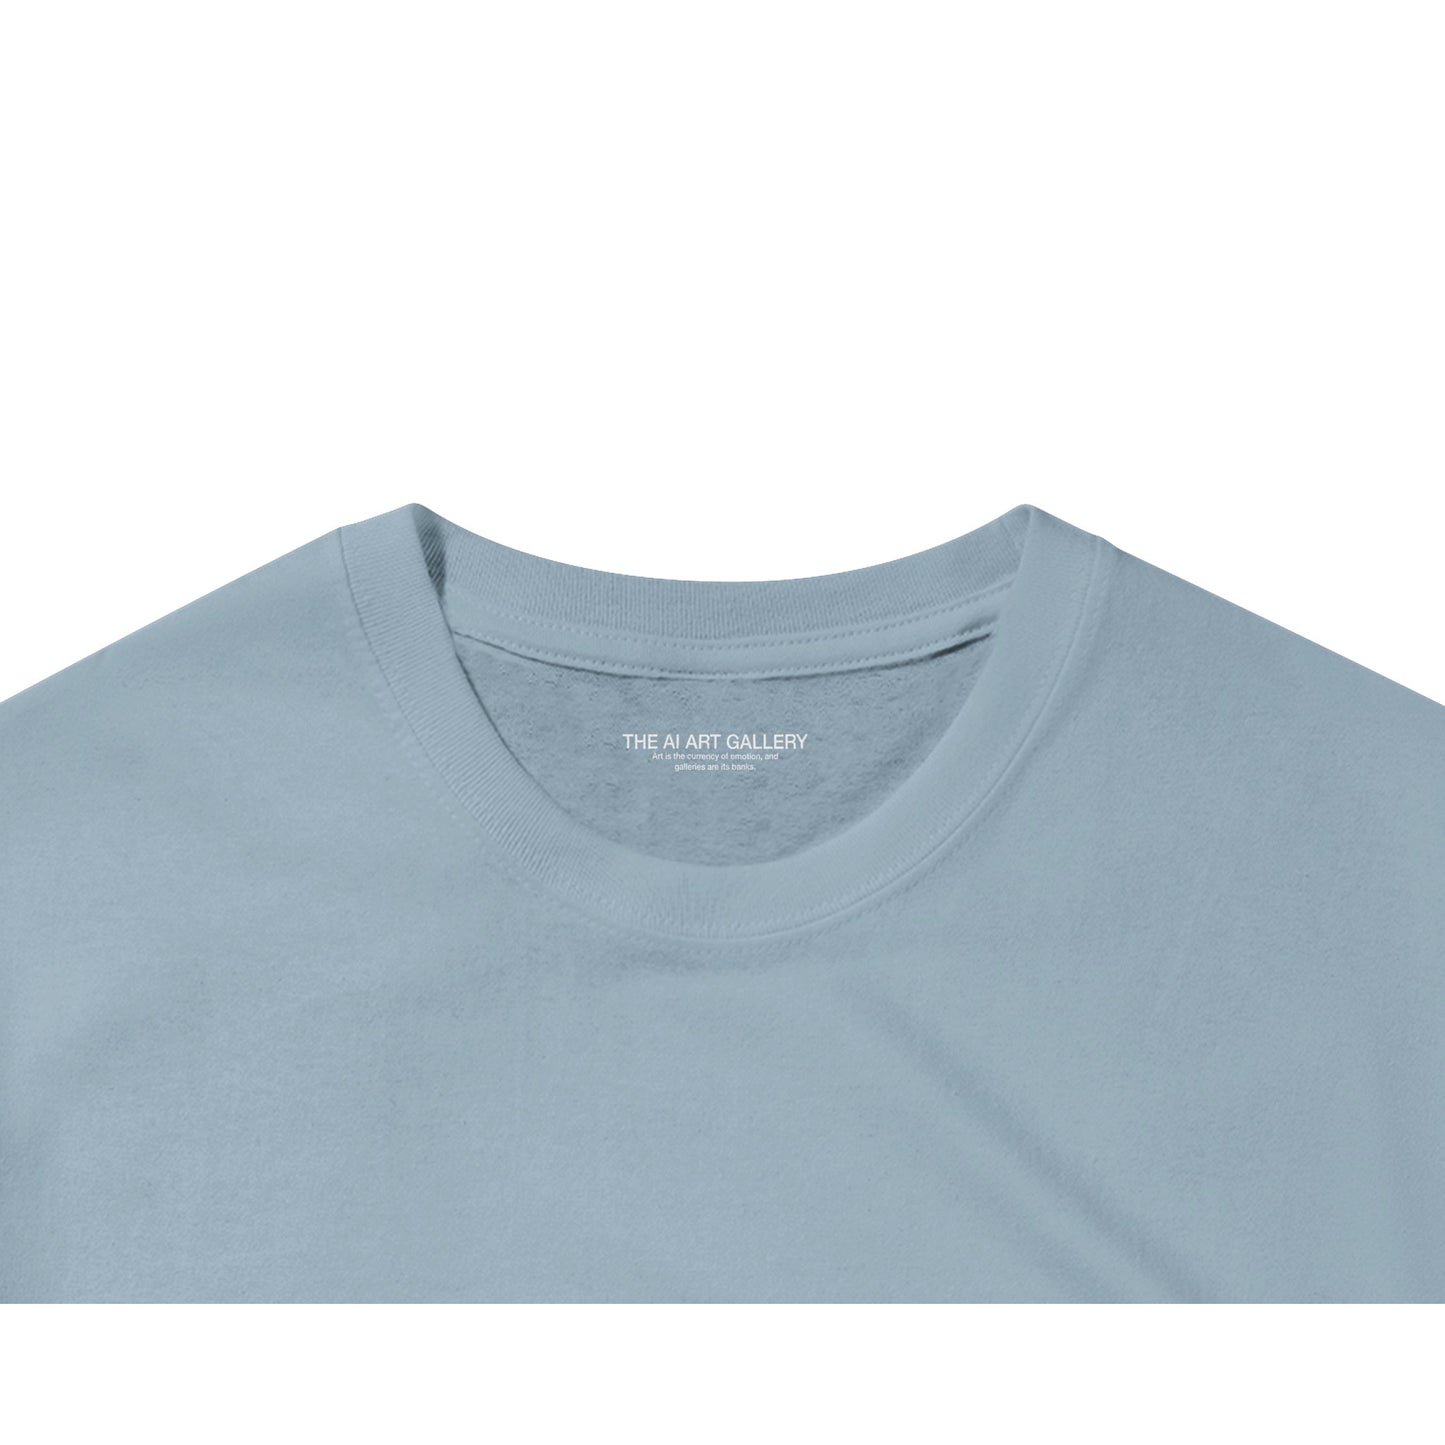 distortion / Gallery Staff Collection / T-shirt / light blue